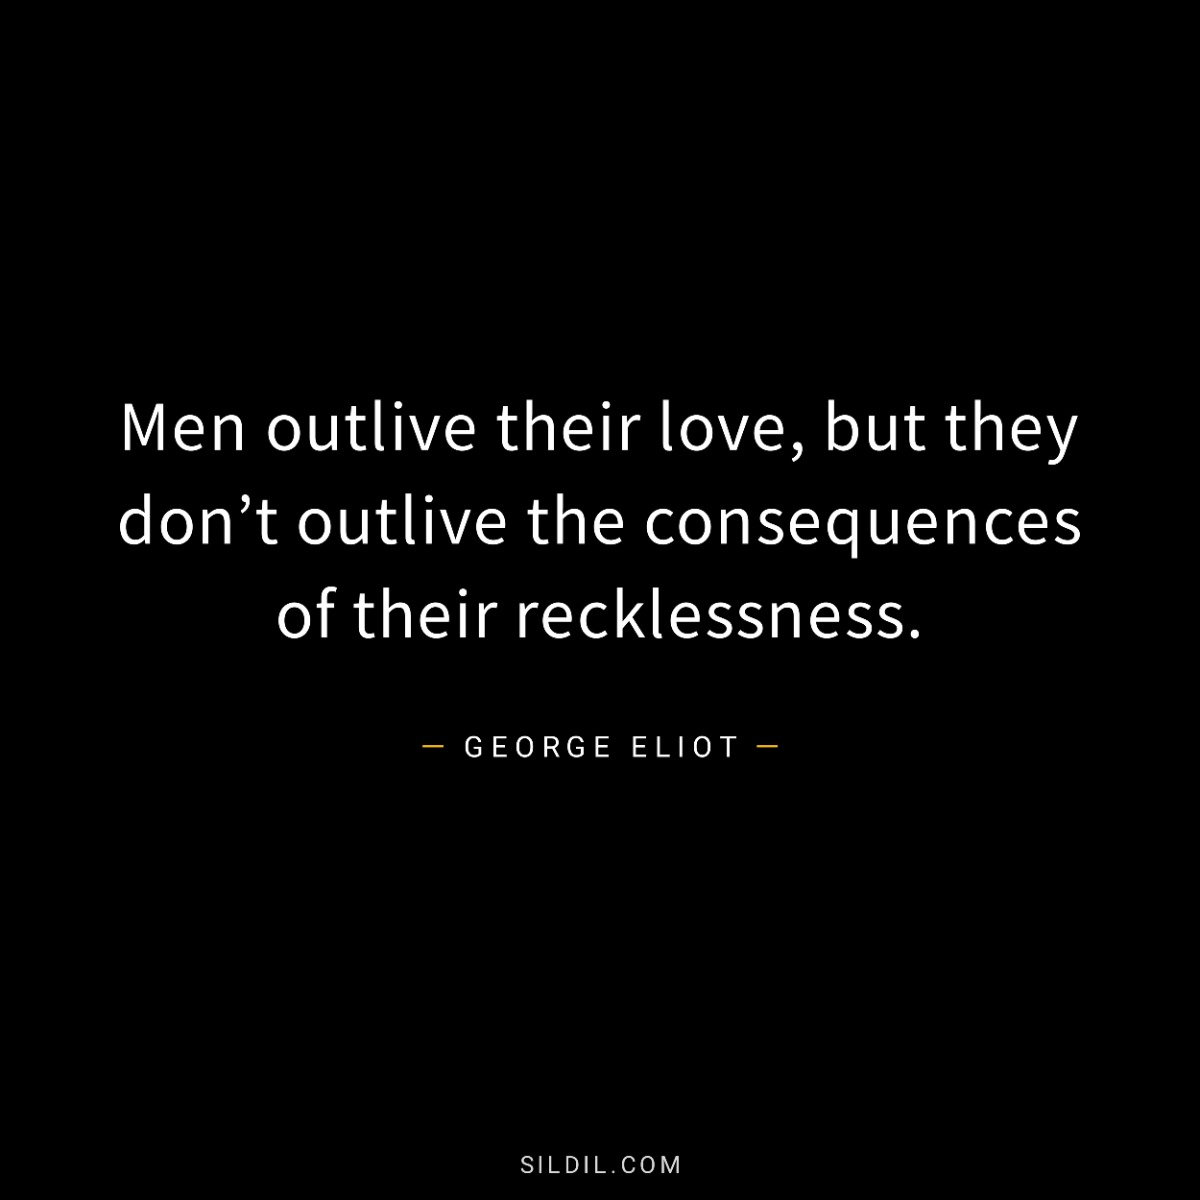 Men outlive their love, but they don’t outlive the consequences of their recklessness.